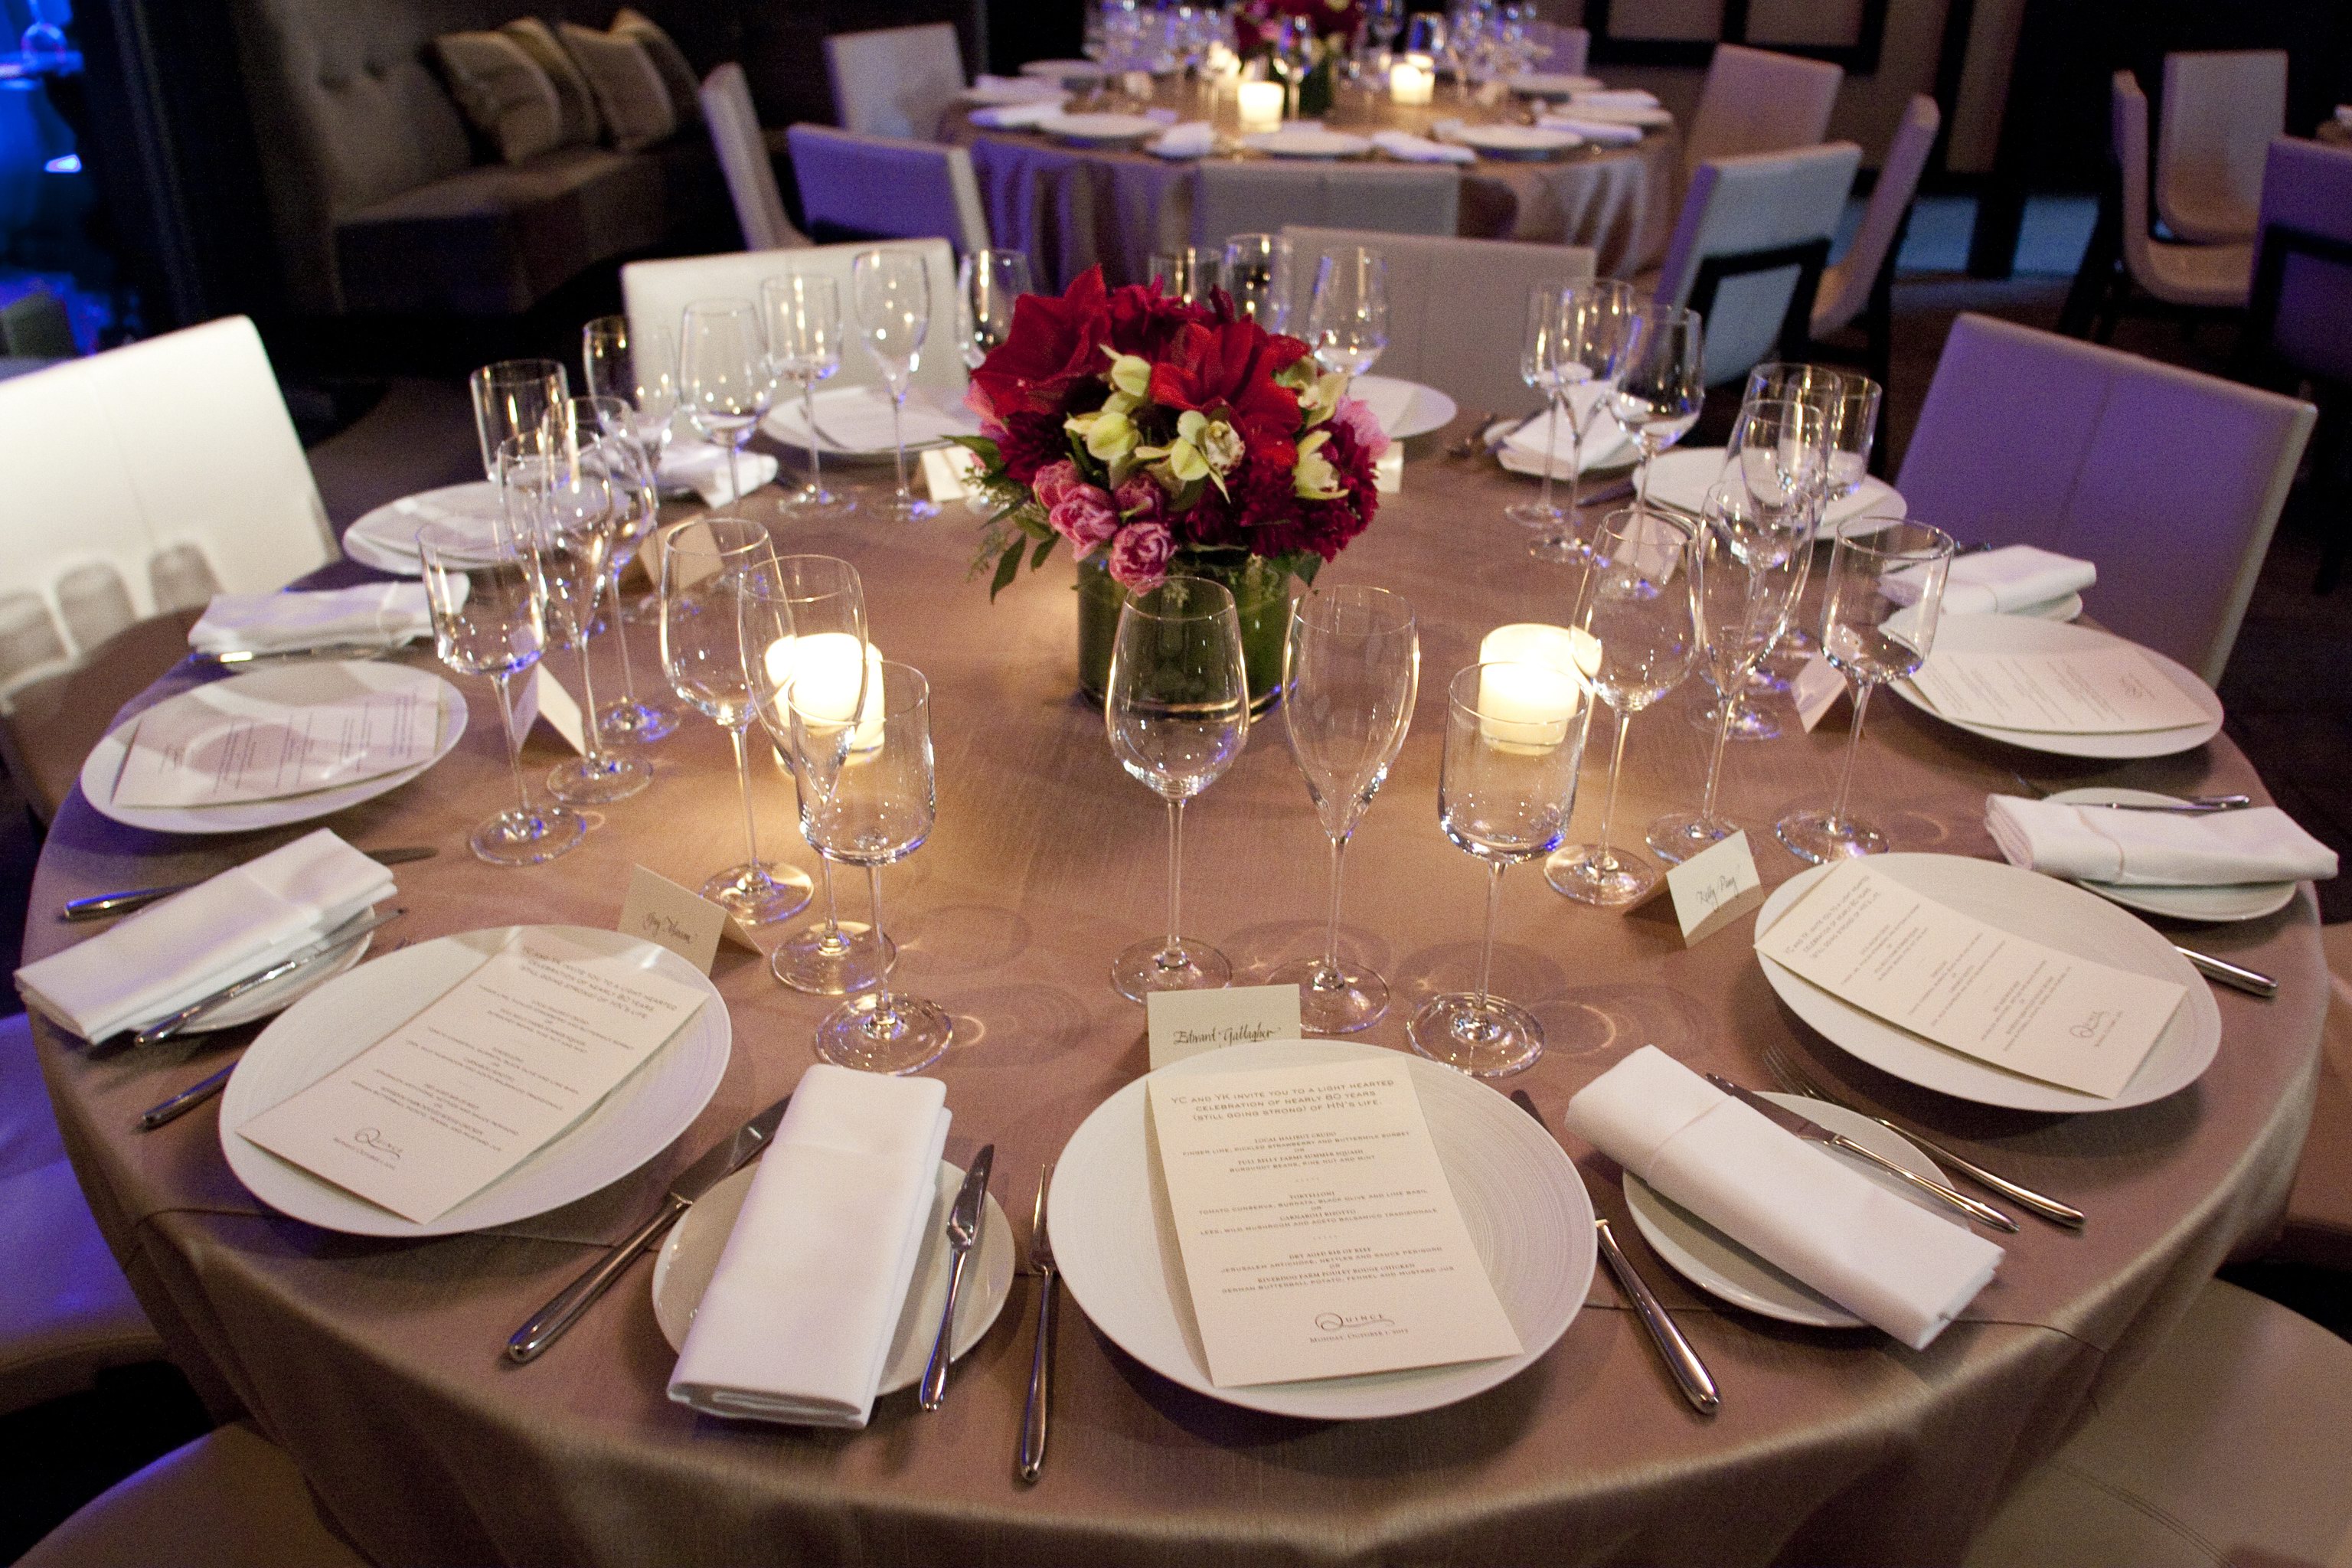 Mastering Corporate Event Planning and Design: Why Details Matter